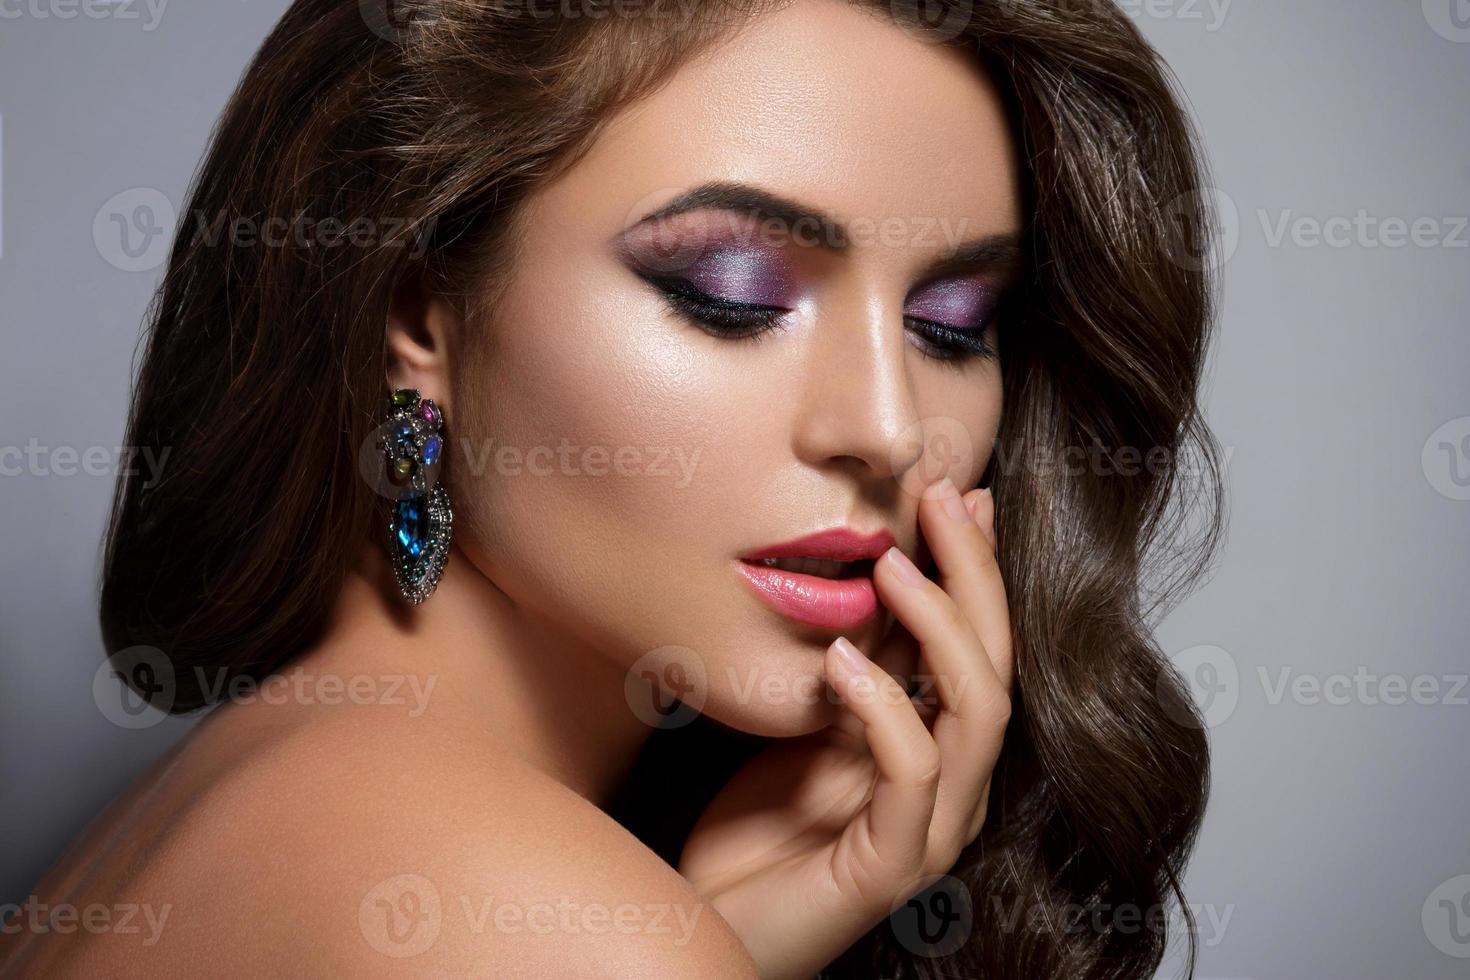 Gorgeous woman with beautiful a make-up and hairstyle photo